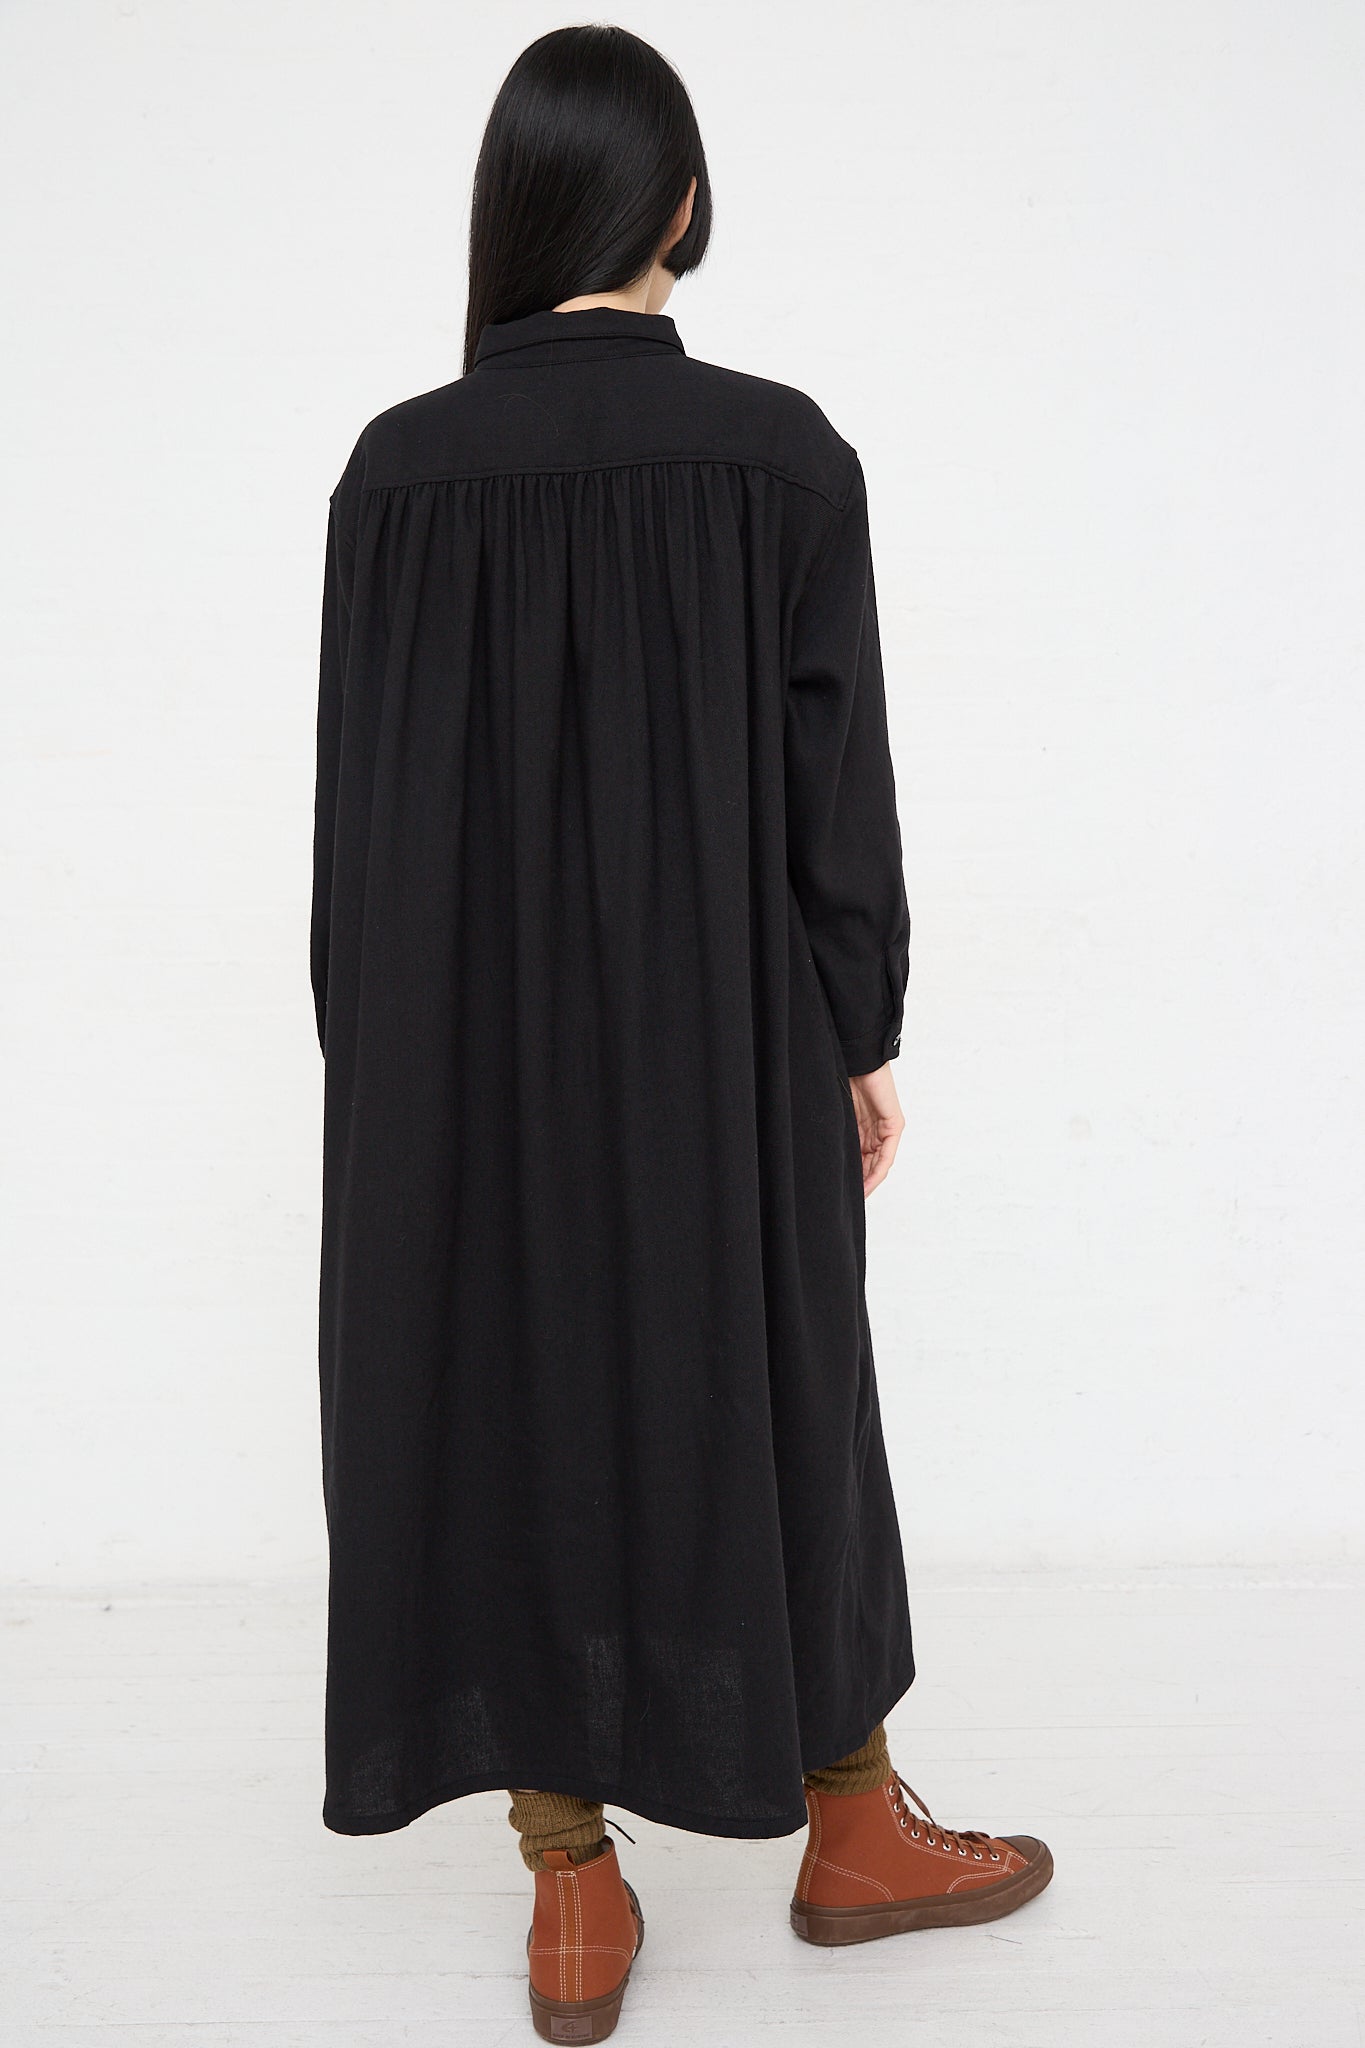 The back view of a woman wearing an Ichi Woven Dress in Black.